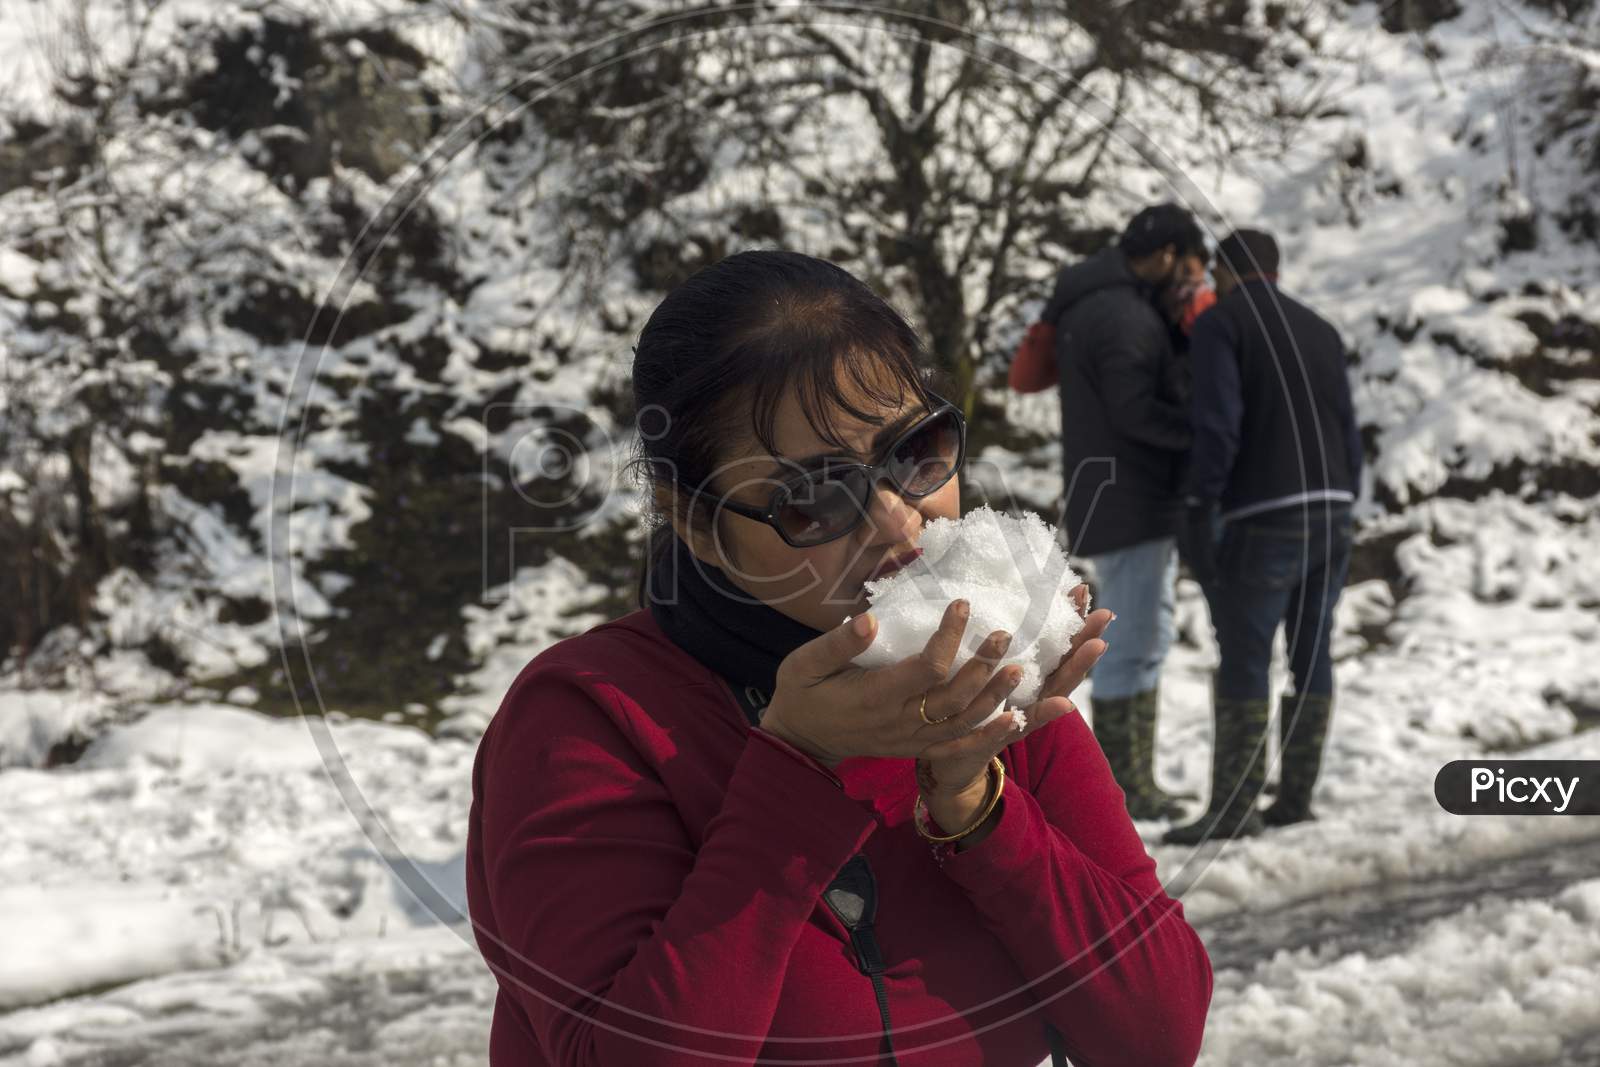 Tourist Trying To Eat Snow Just After Snowfall.